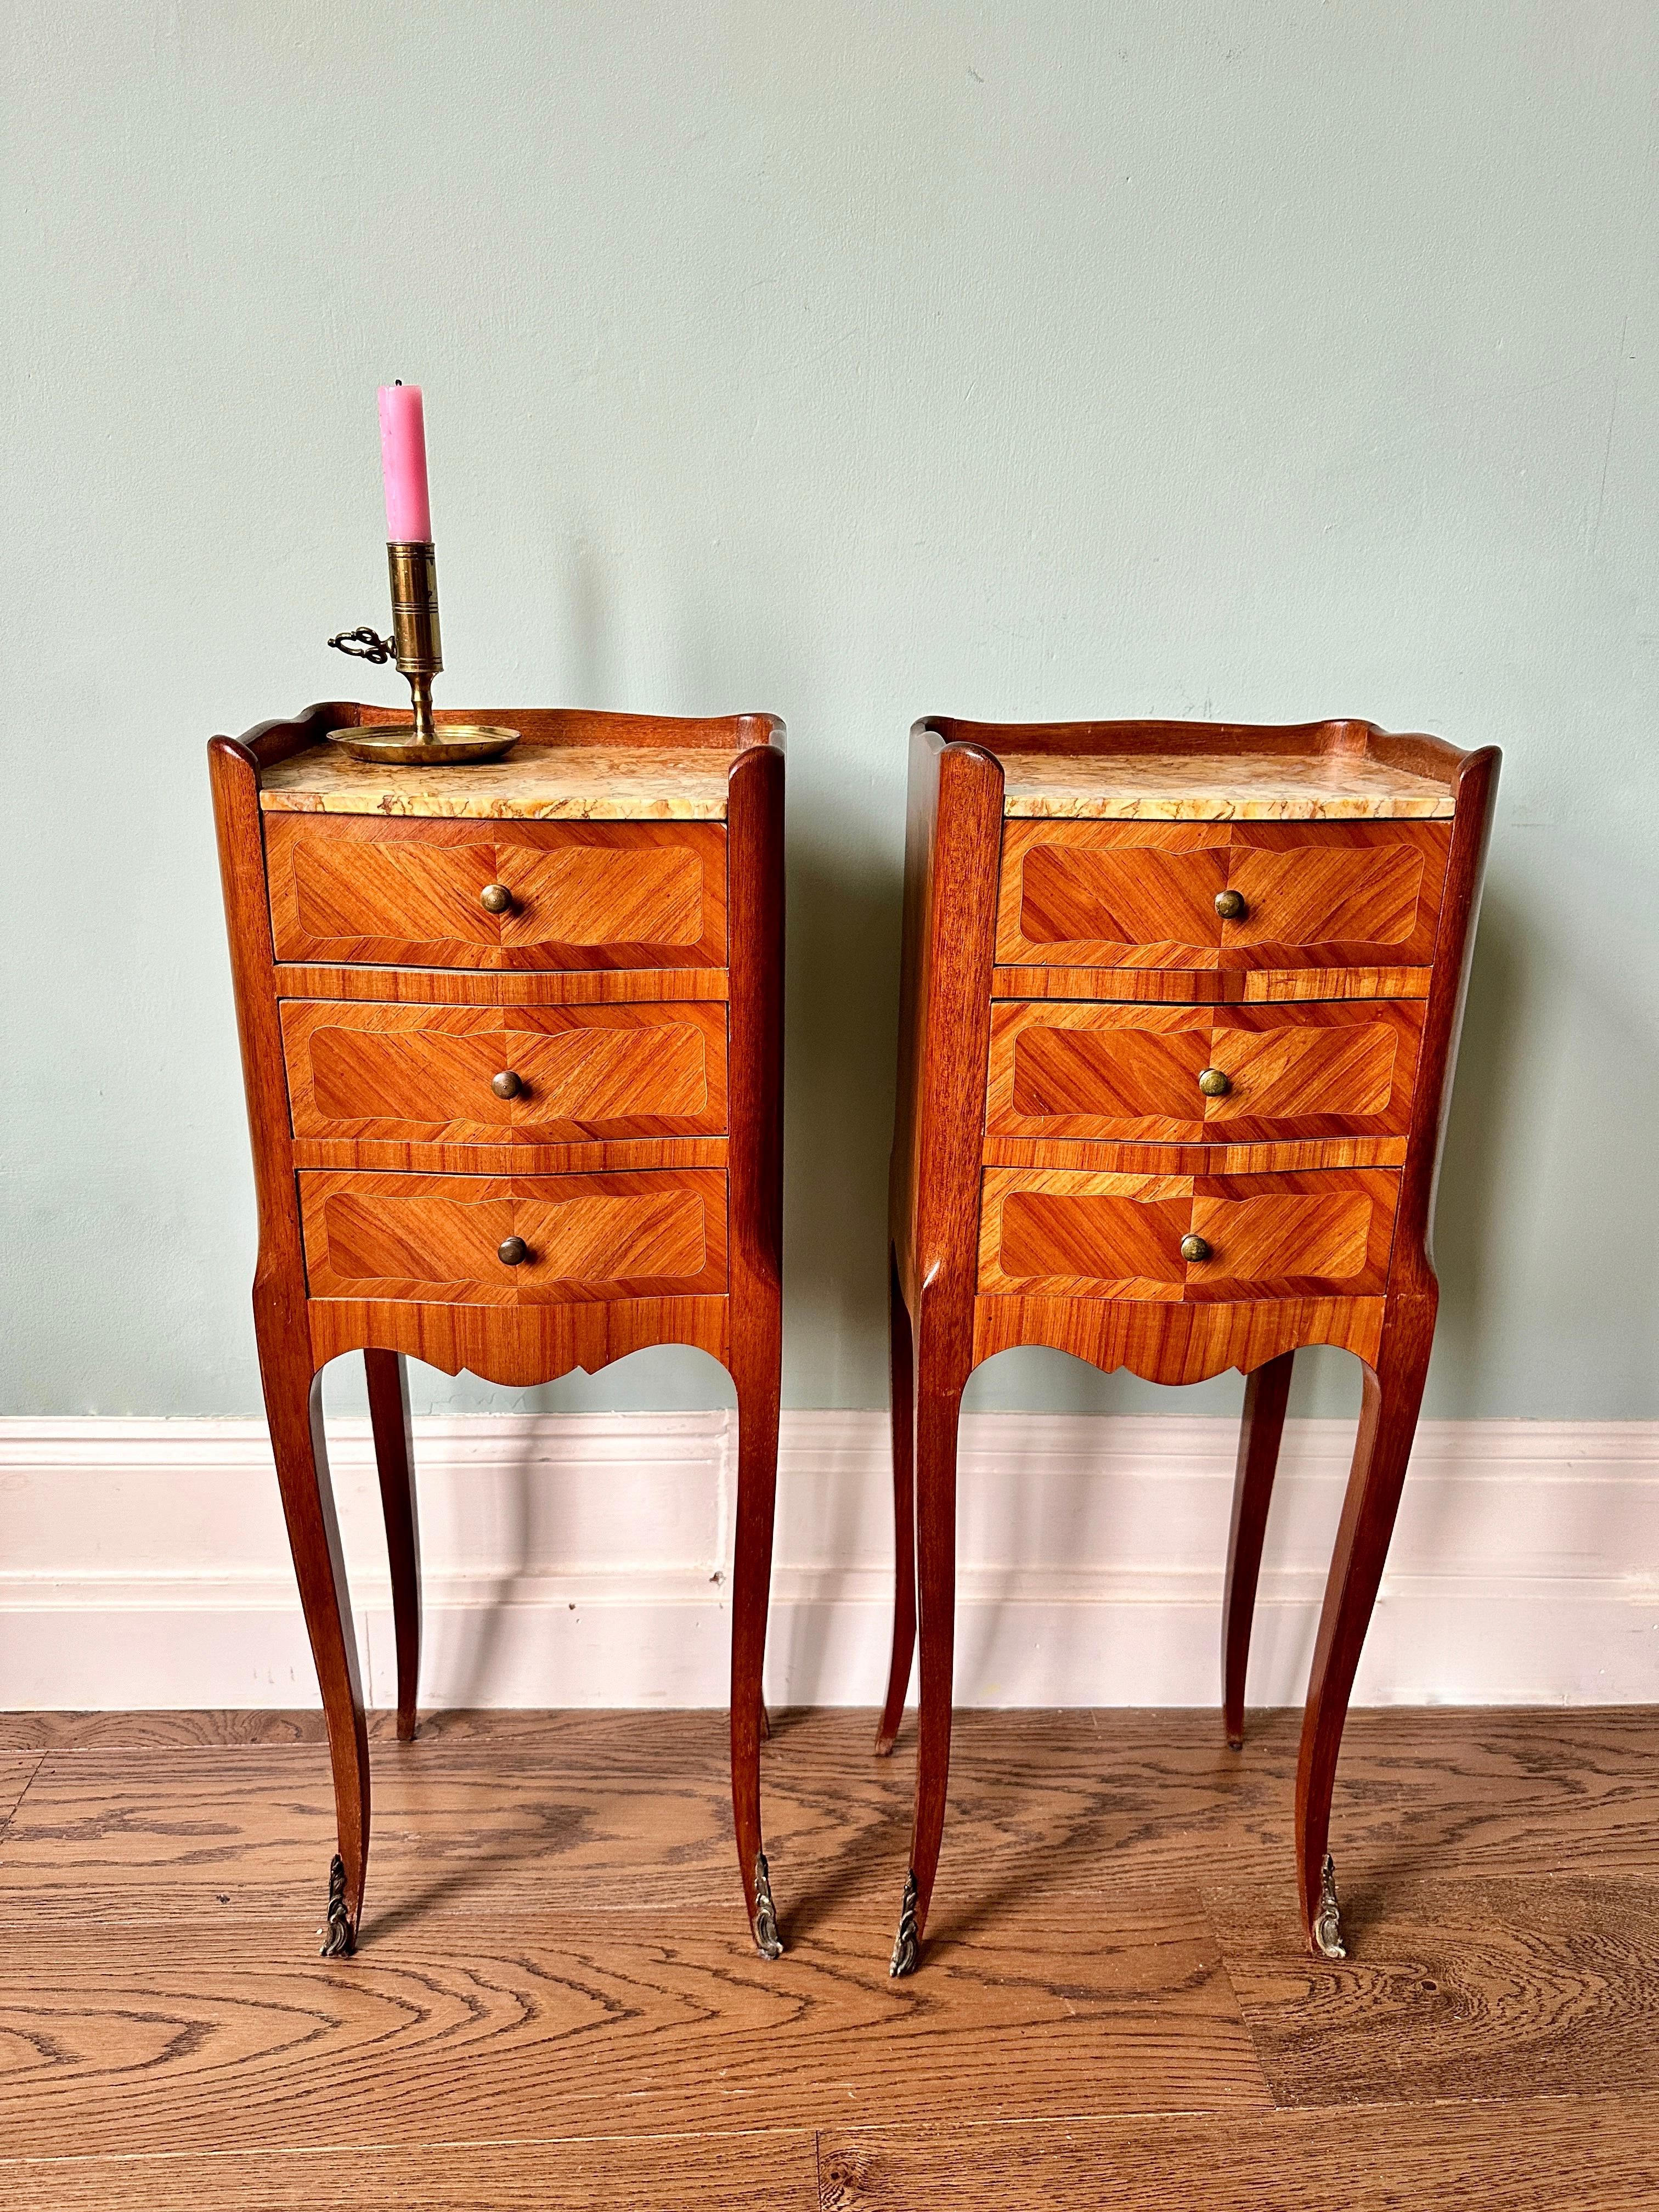 Pair of early C20th French kingwood veneer, mahogany and marble bedside tables.

Very elegant and slim Louis XVI style, three-drawer cabinets (circa 1910) raised on slender cabriole legs with brass handles and ormolu feet. 

In excellent and sturdy